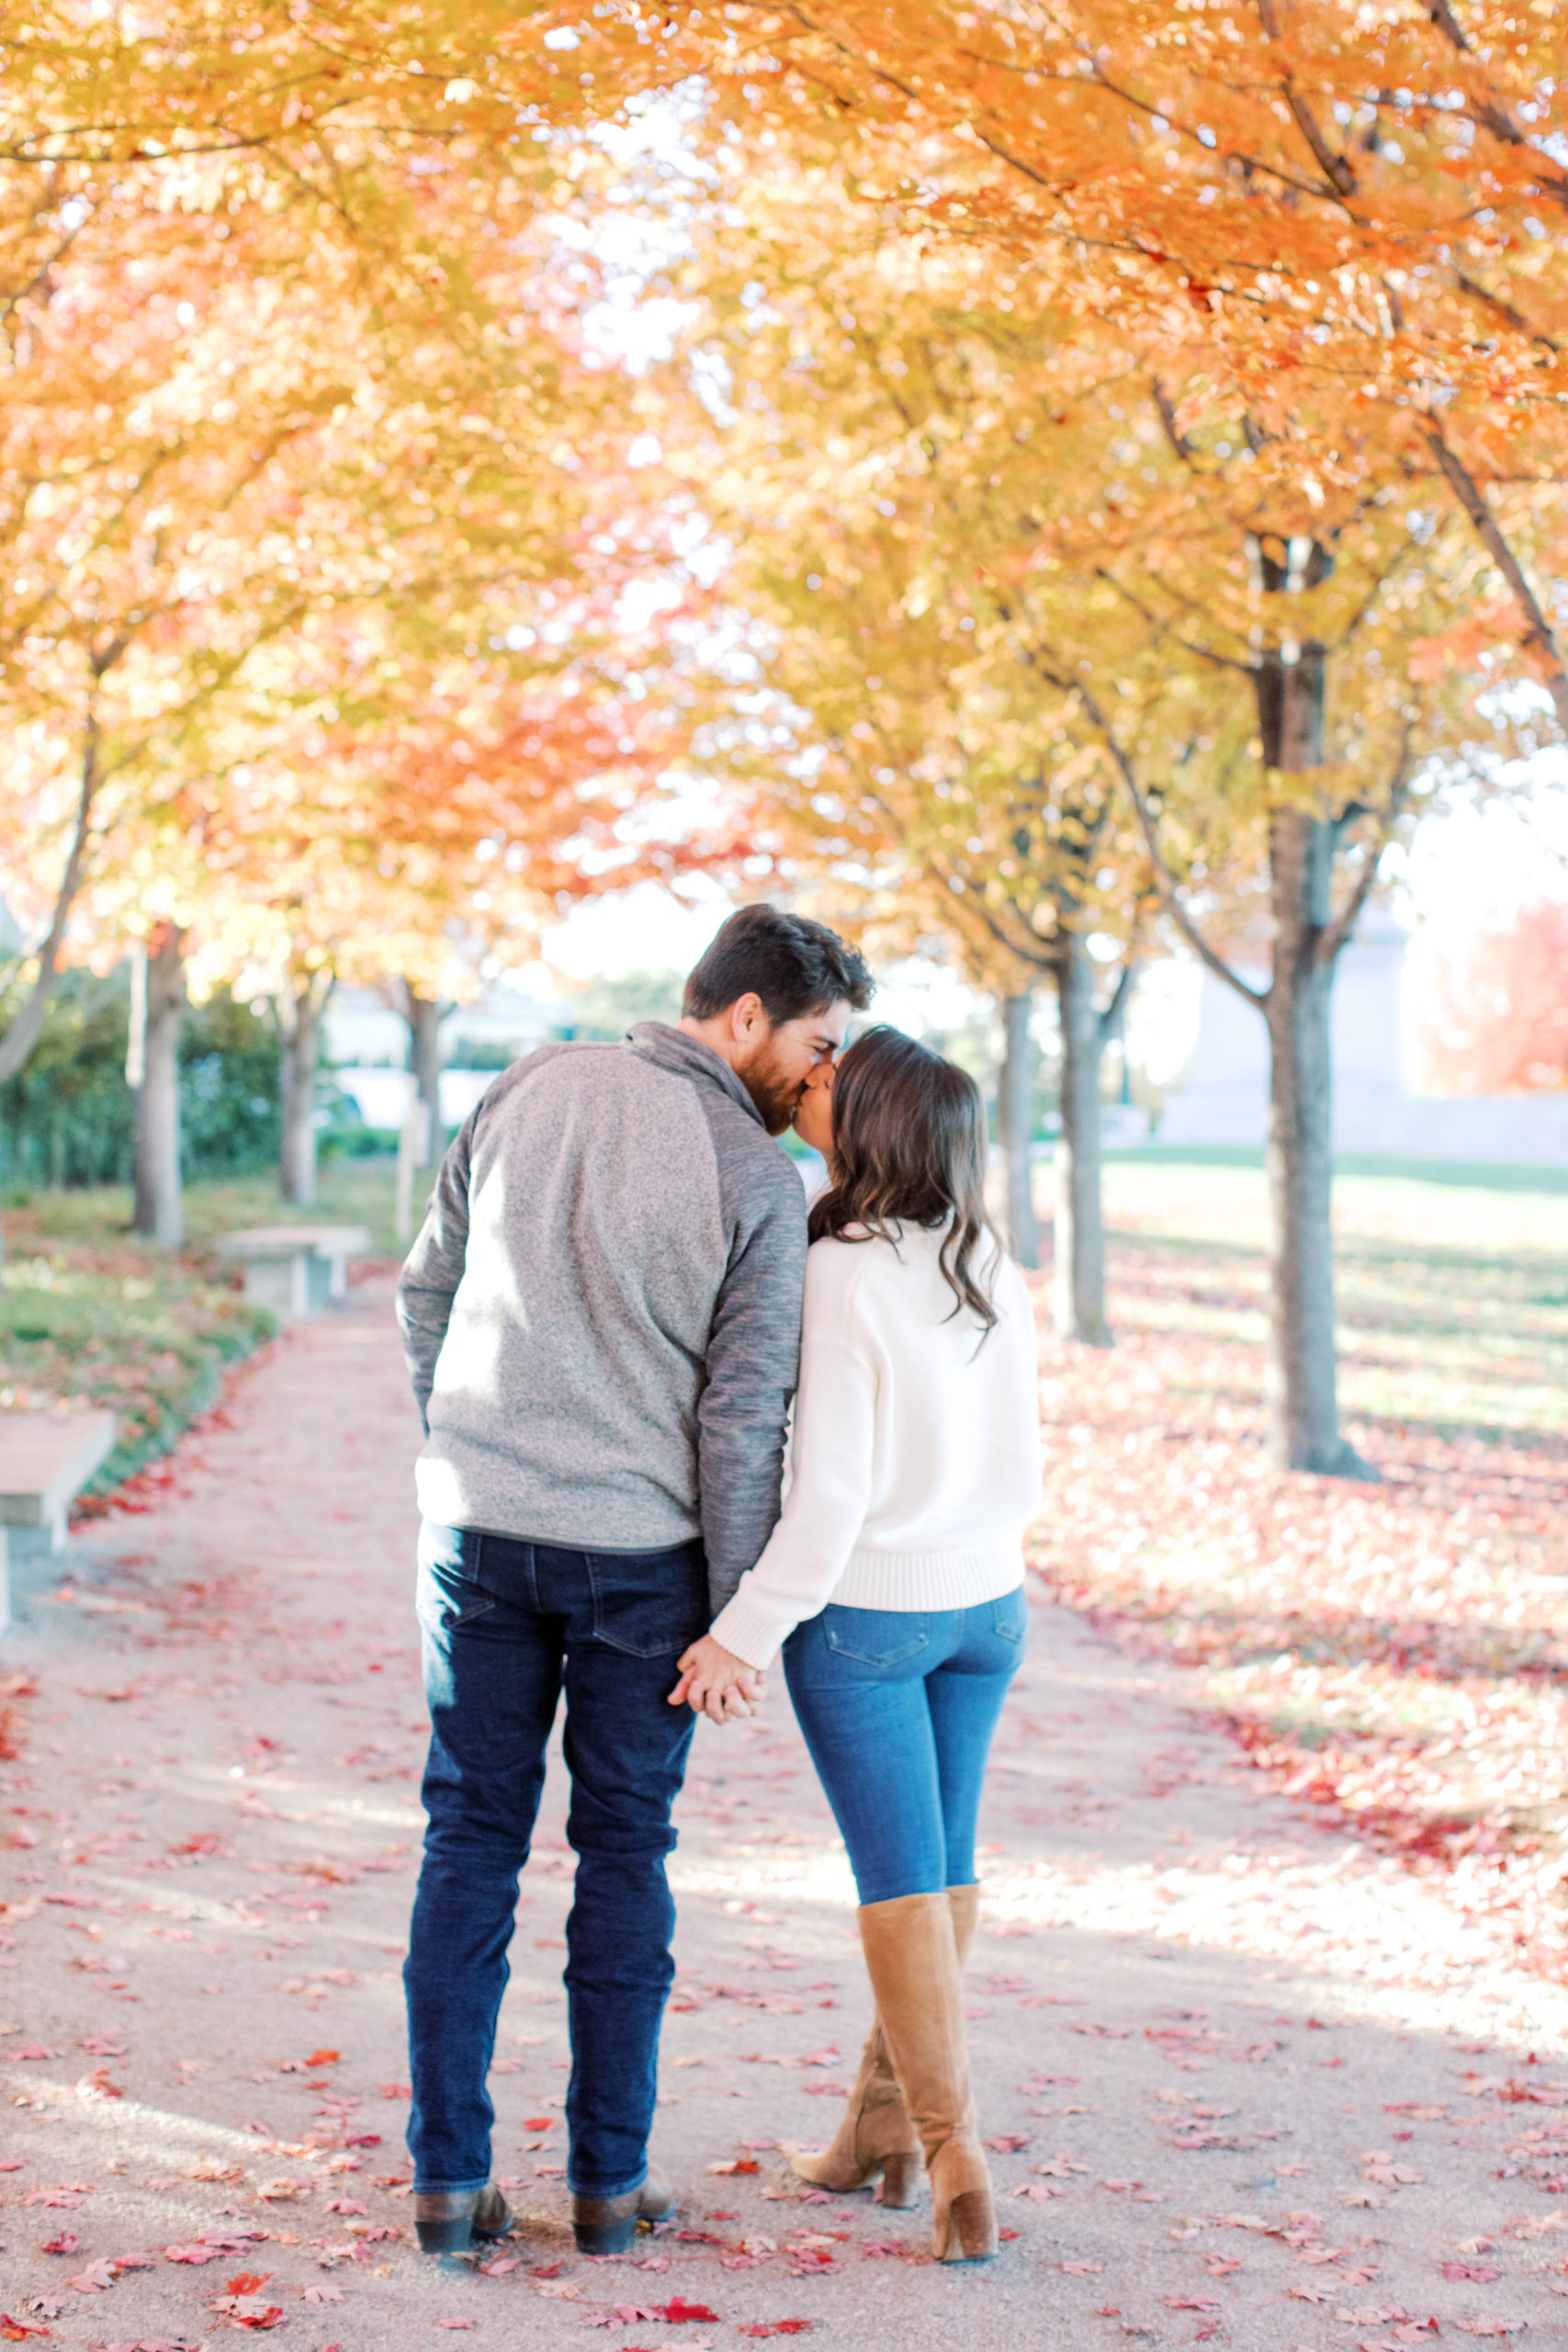 Forest park st louis fall engagement session on film